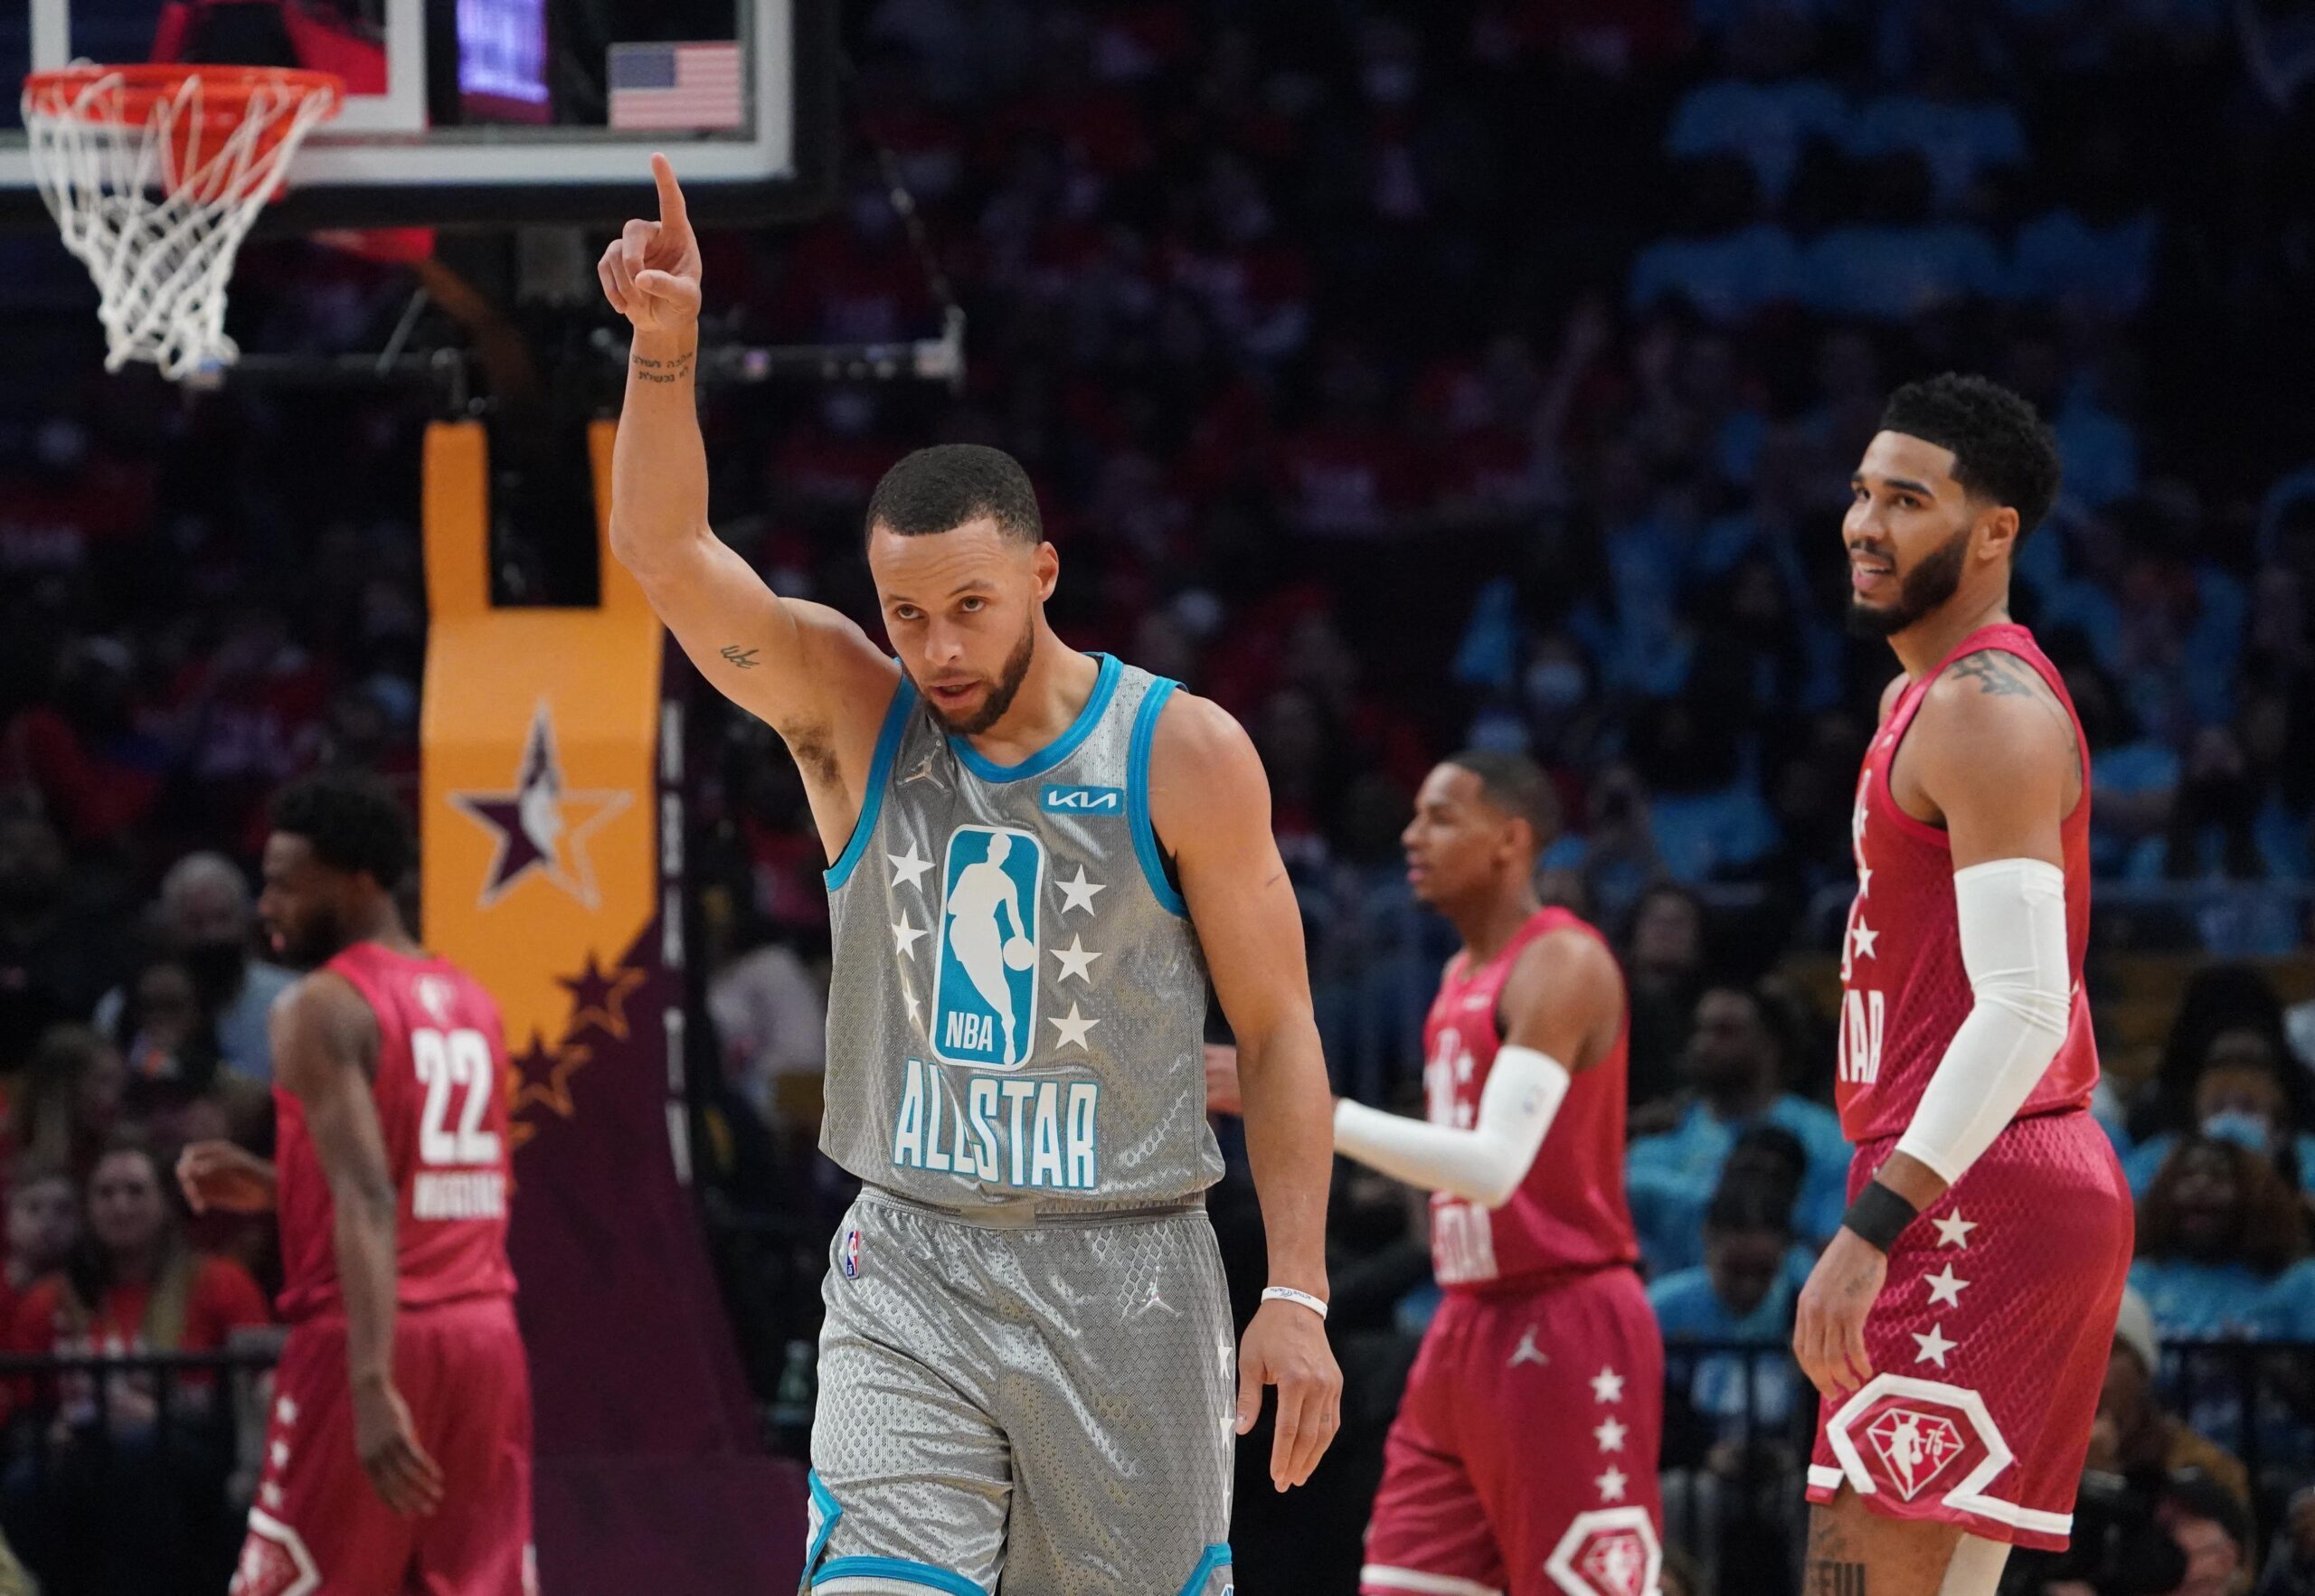 LeBron James' Team Wins NBA All-Star Game; Stephen Curry Sets